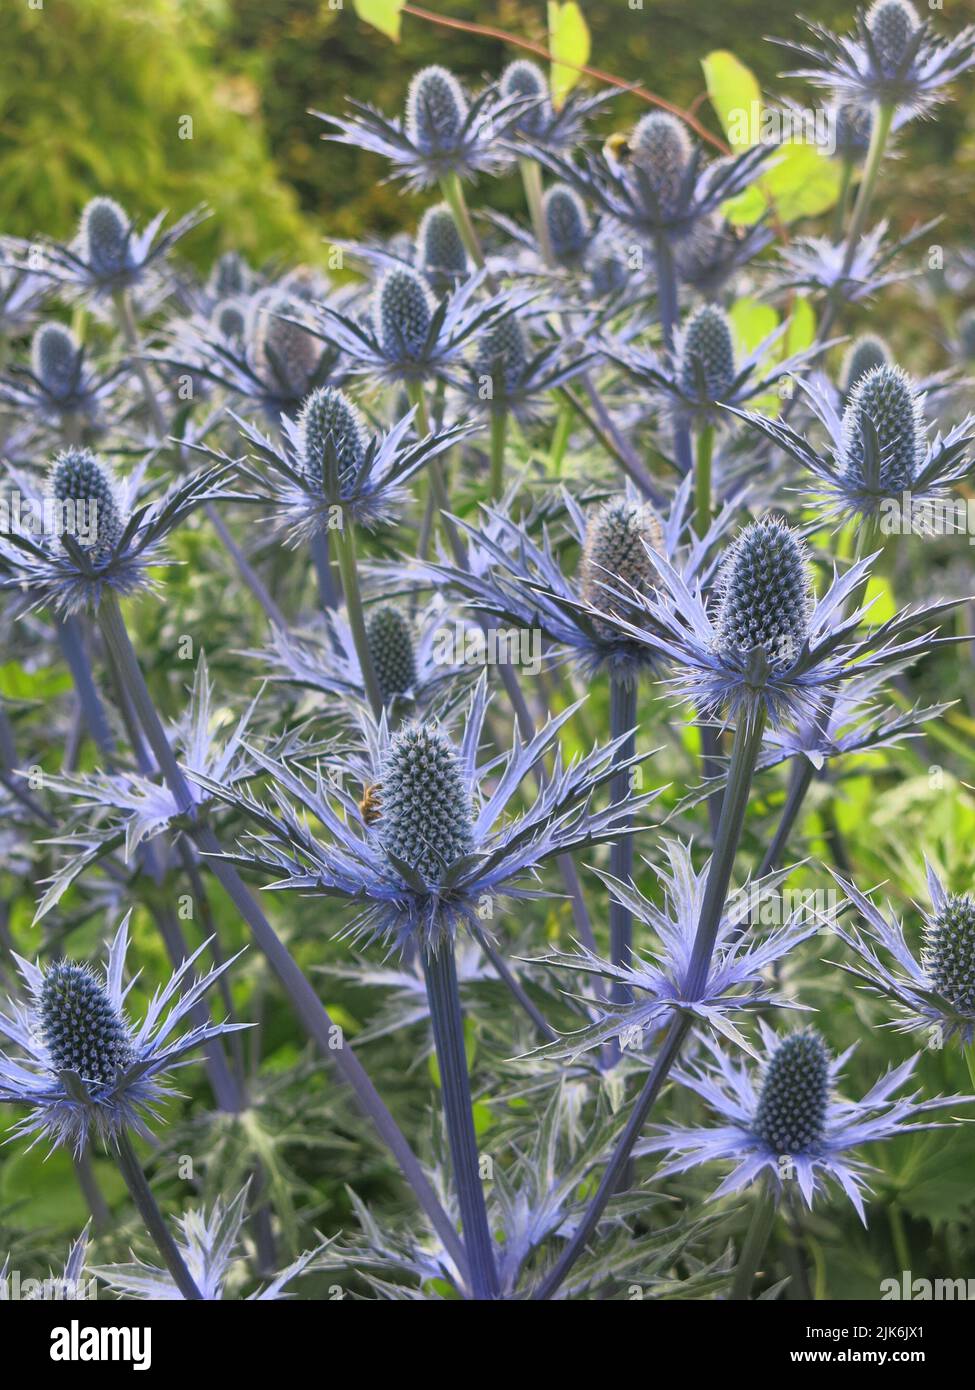 With thistle-like, prickly, pale blue flowers, alpine sea holly or eryngium alpinum is a striking ornamental plant growing here in a Scottish garden. Stock Photo